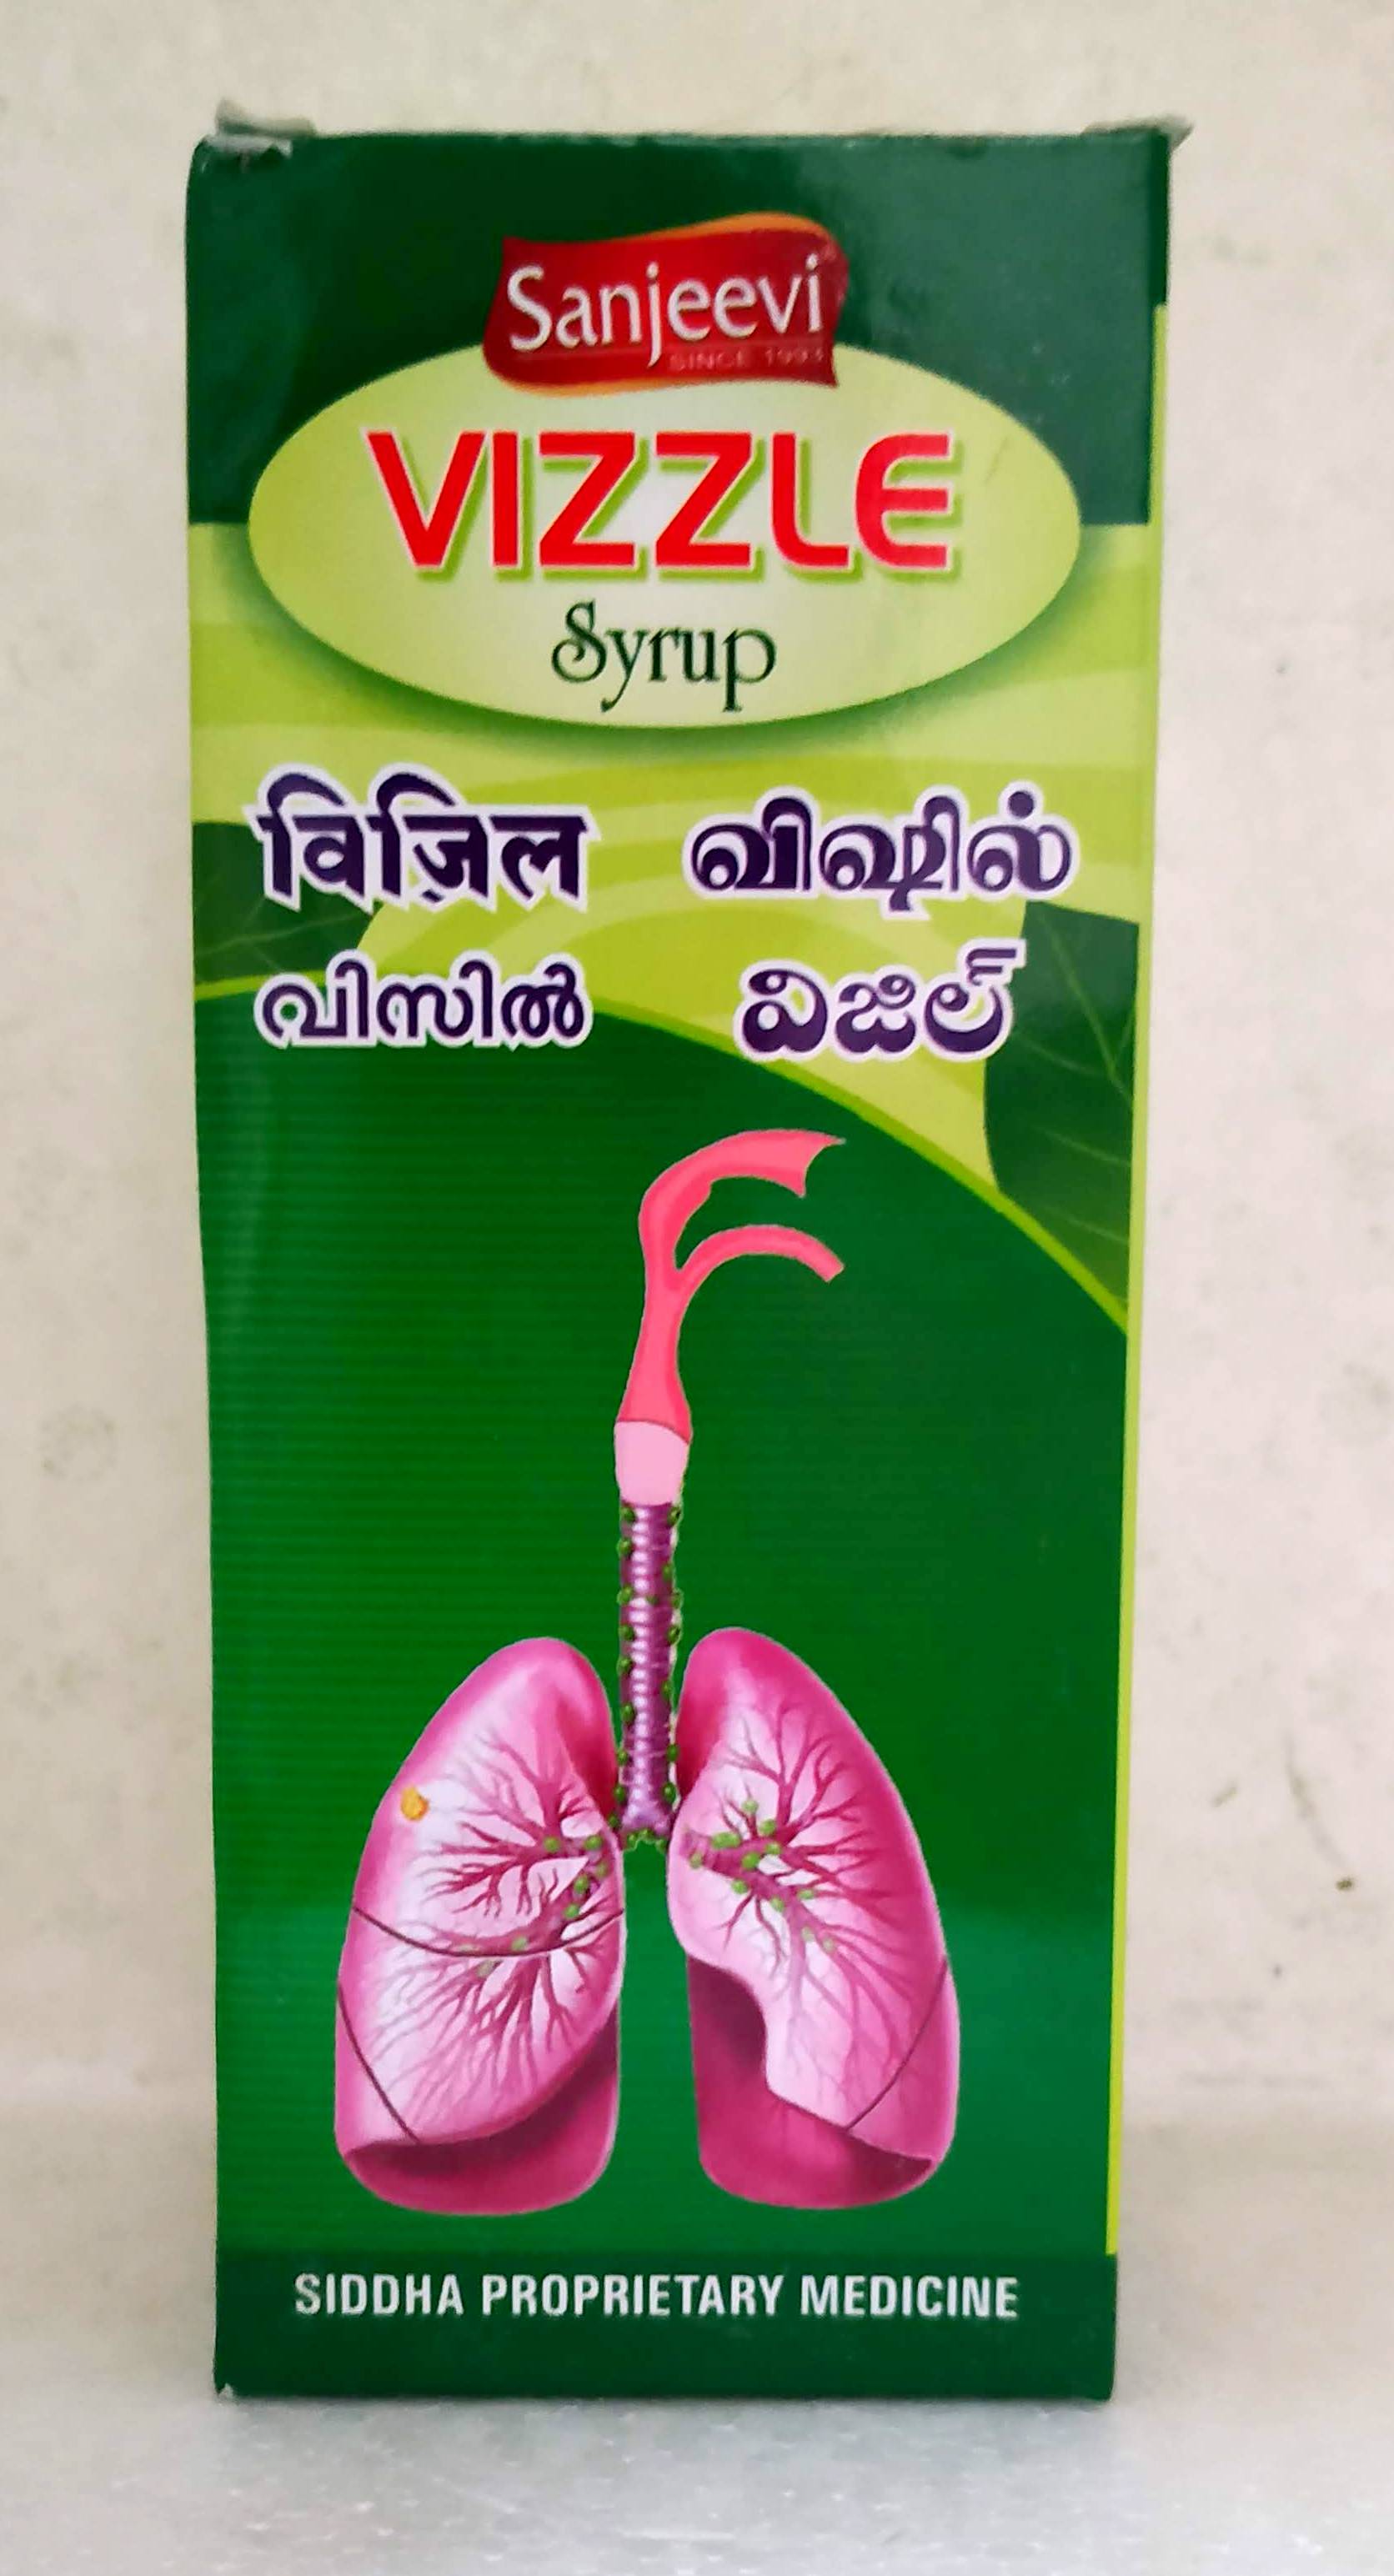 Shop Vizzle Syrup 200ml at price 195.00 from Sanjeevi Online - Ayush Care